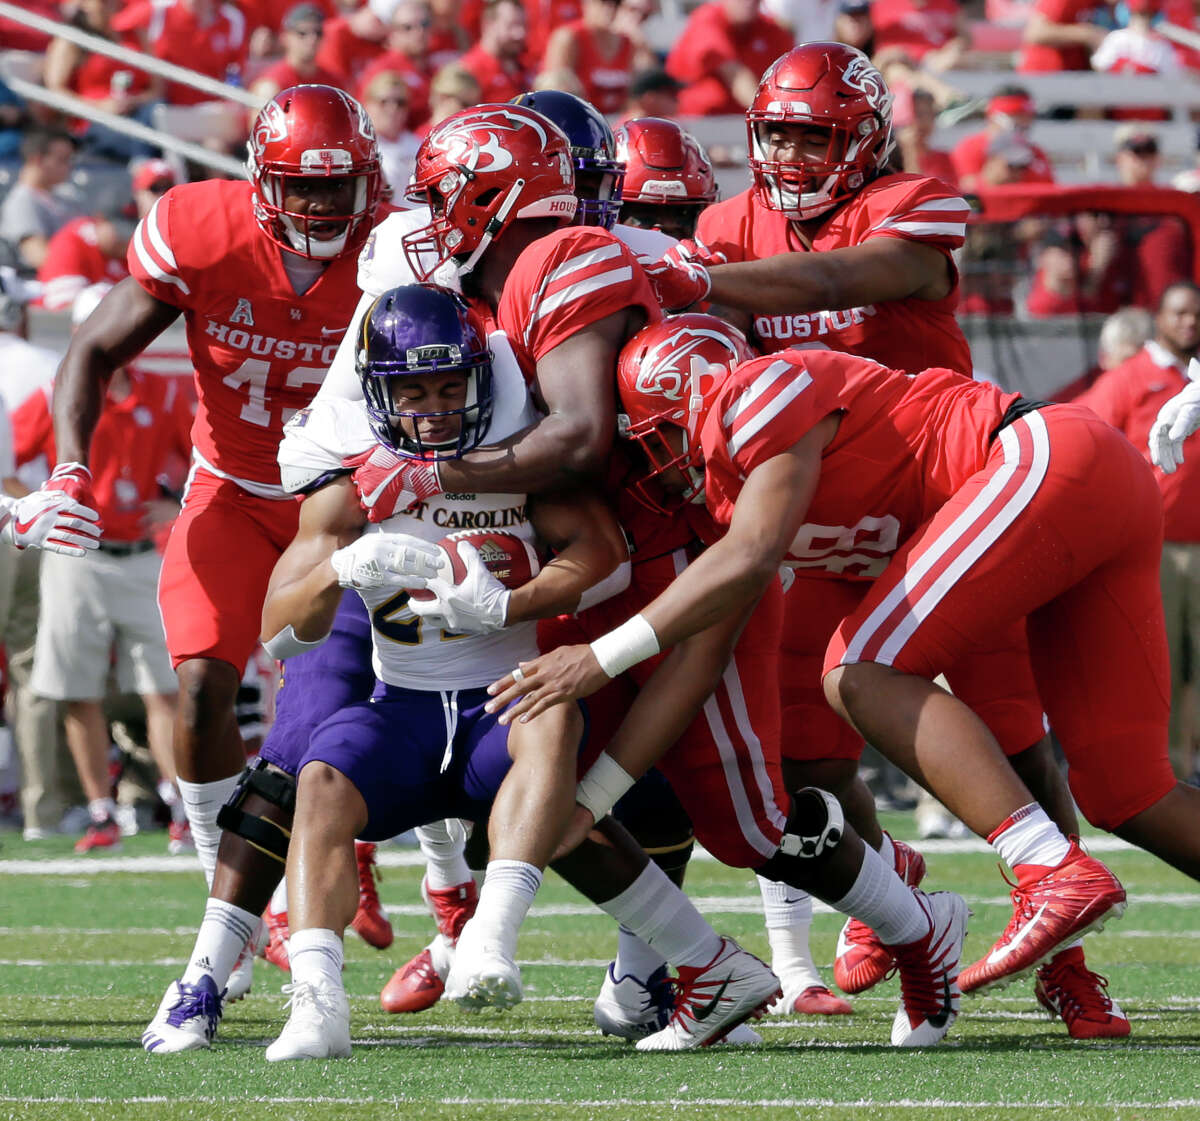 East Carolina running back Devin Anderson (25) is surrounded on a tackle by Houston's Leroy Godfrey (43), Ed Oliver (10), Emeke Egbule (8) and defensive lineman Payton Turner (98) in the first half of their game, Nov. 4, 2017, in Houston, TX. (Michael Wyke / For the Chronicle)